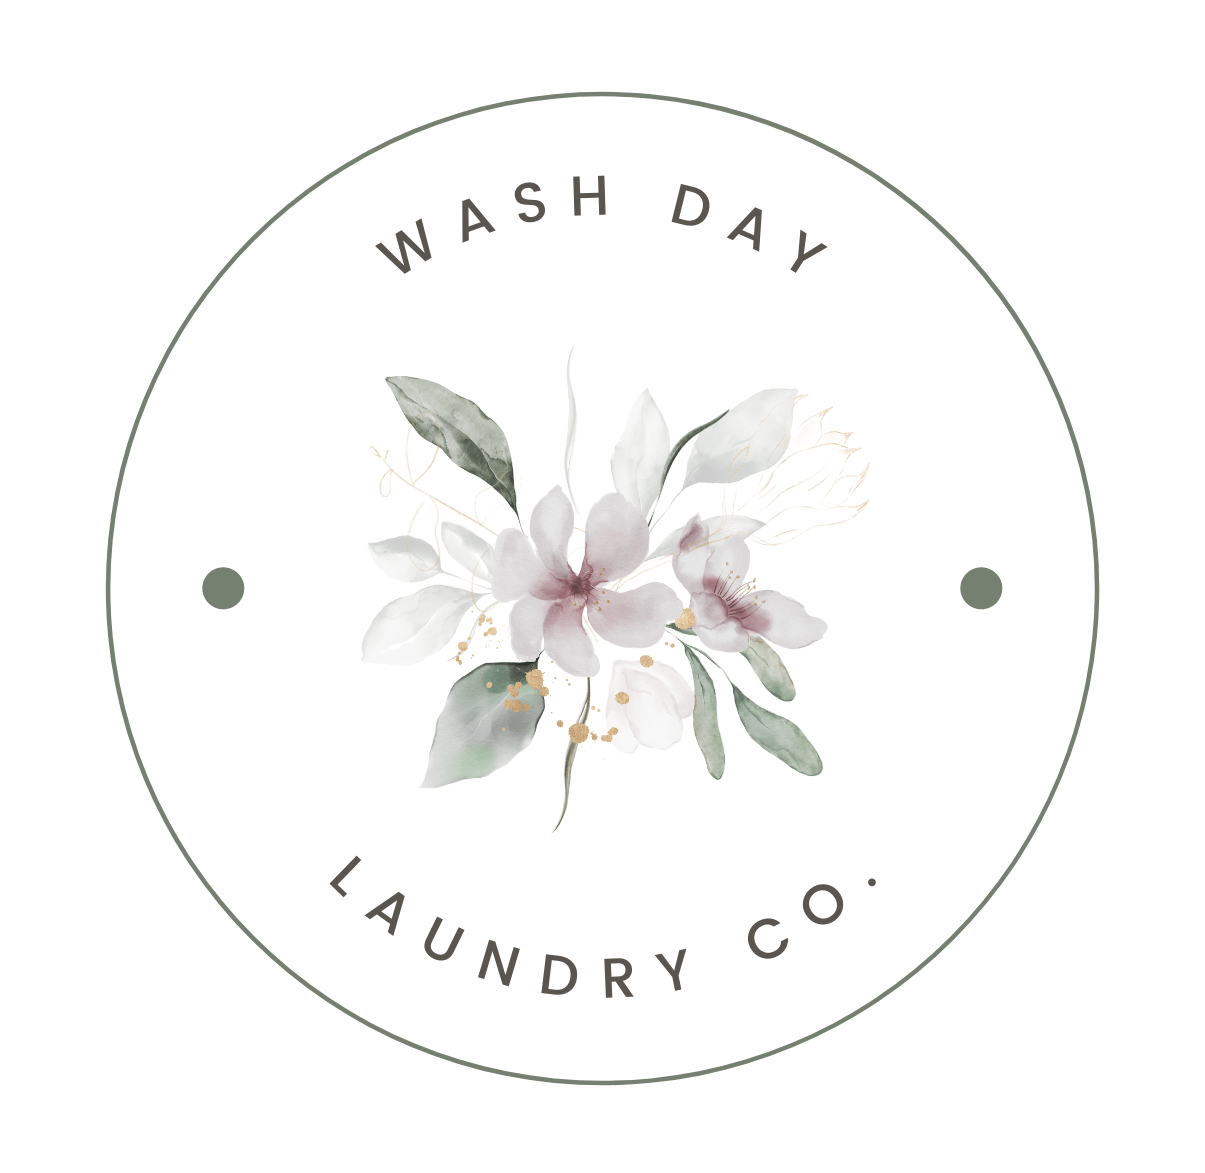 Wash Day Store